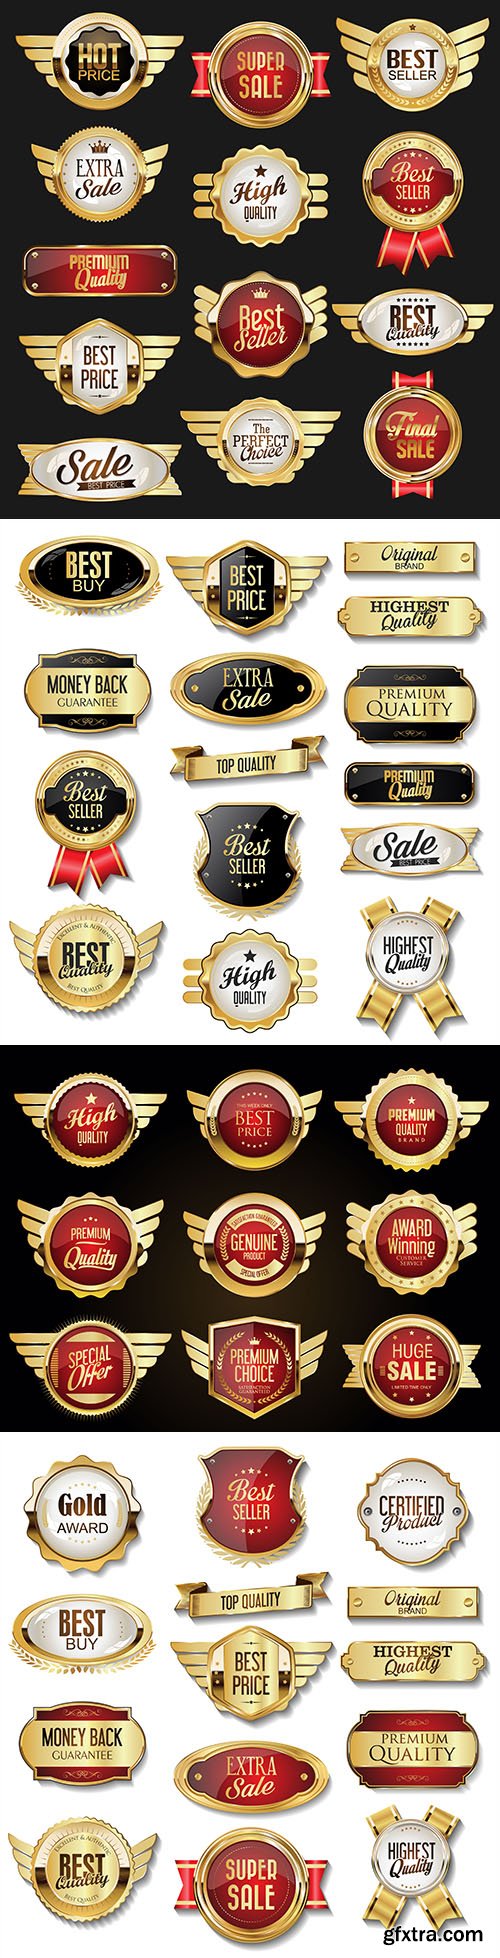 Luxury premium gold badges and labels collection 8